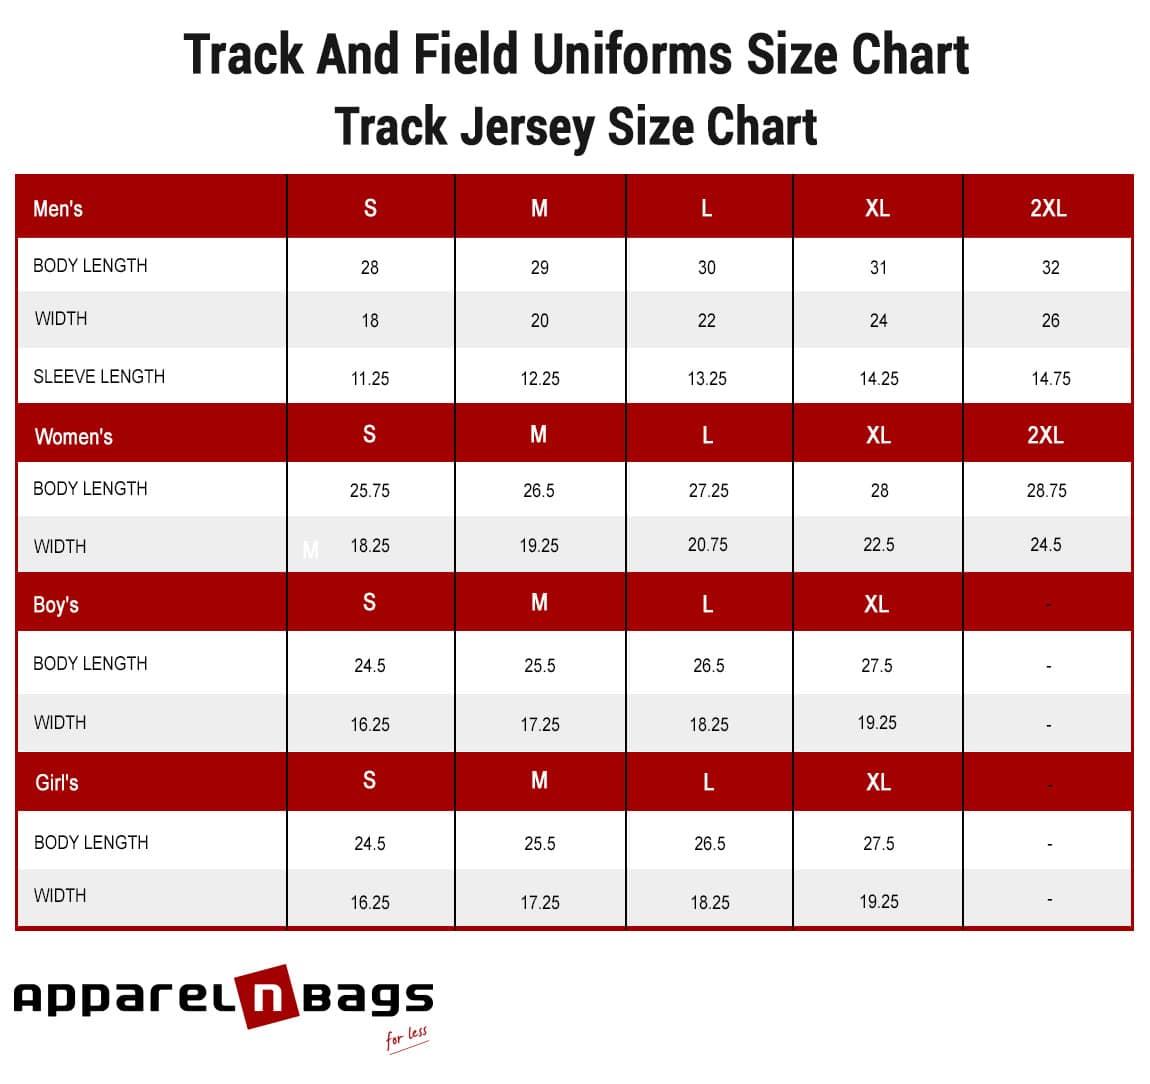 Sizing Charts For Uniforms Cpms Track | My XXX Hot Girl